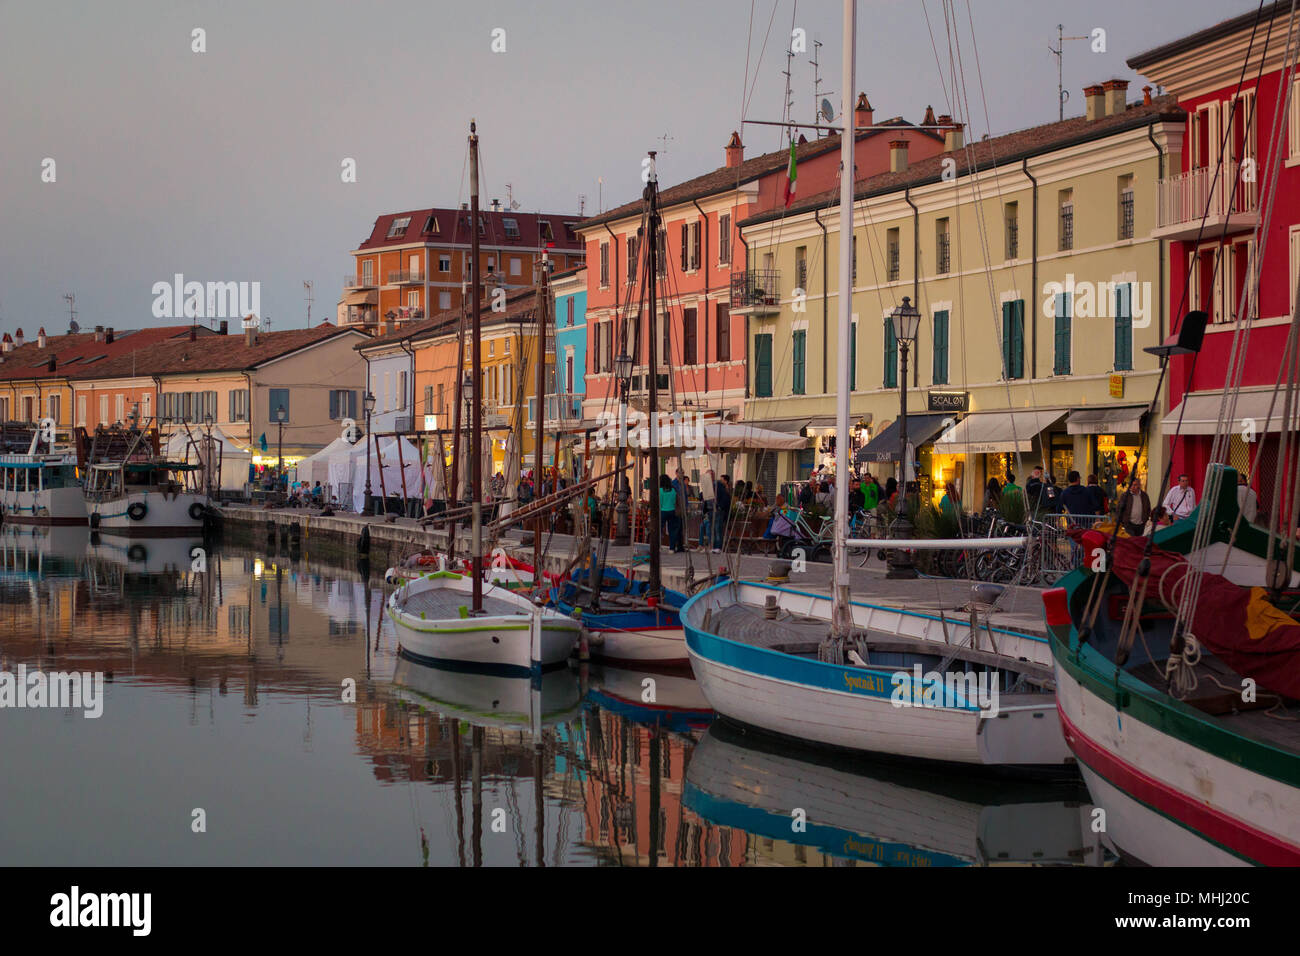 View of Porto Canale, the central canal in the beautiful town of cesenatico,  on the adriatic coast in italy Stock Photo - Alamy